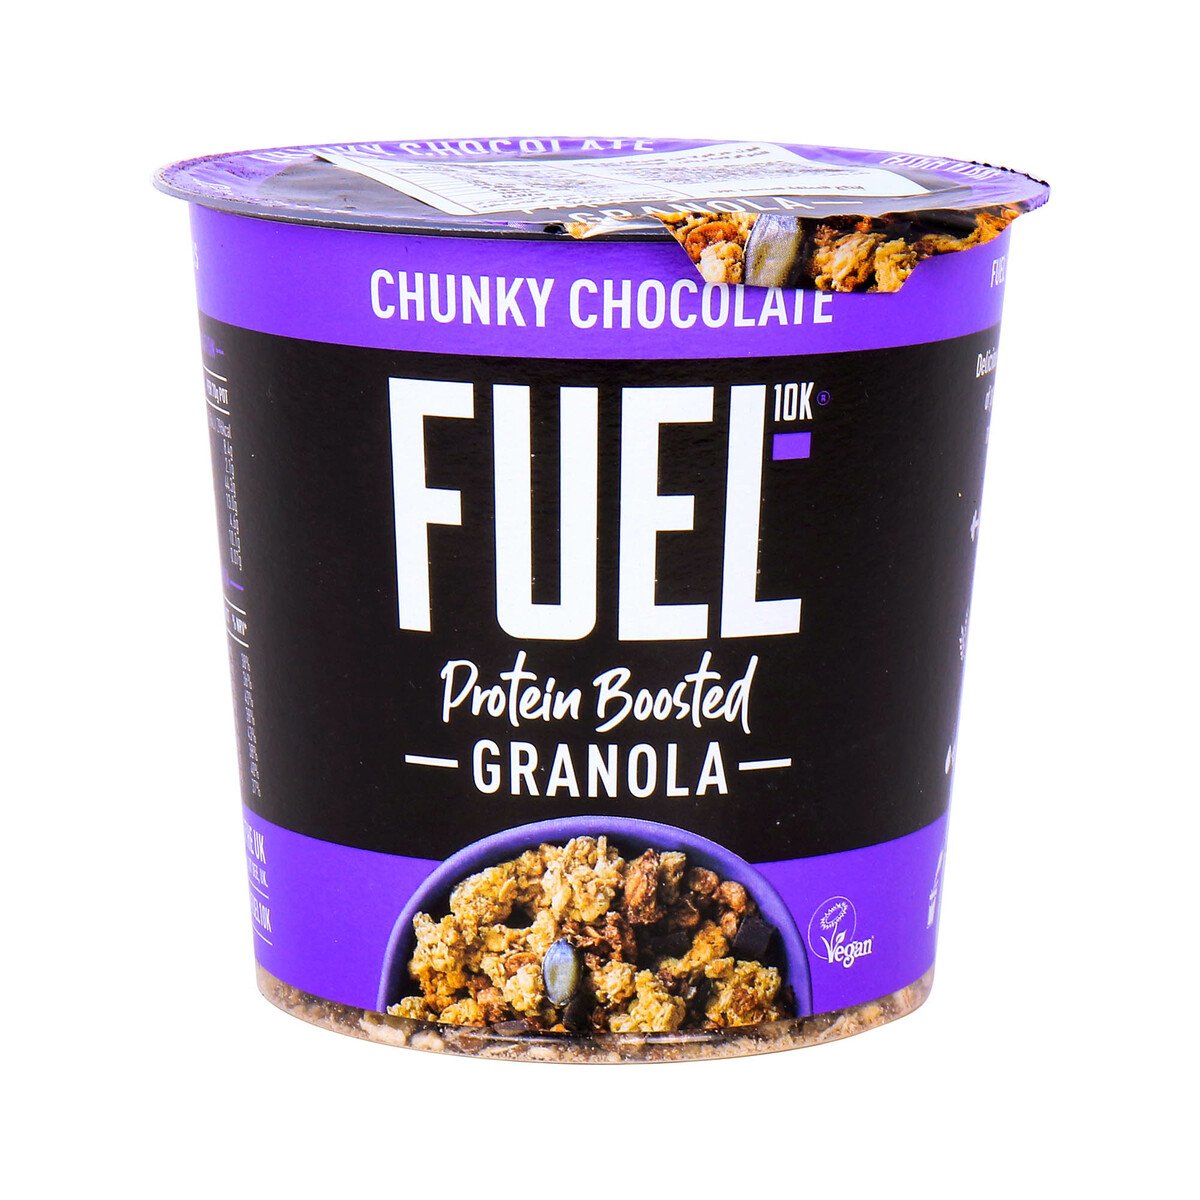 Fuel 10K Protein Boosted Granola Chunky Chocolate 70g